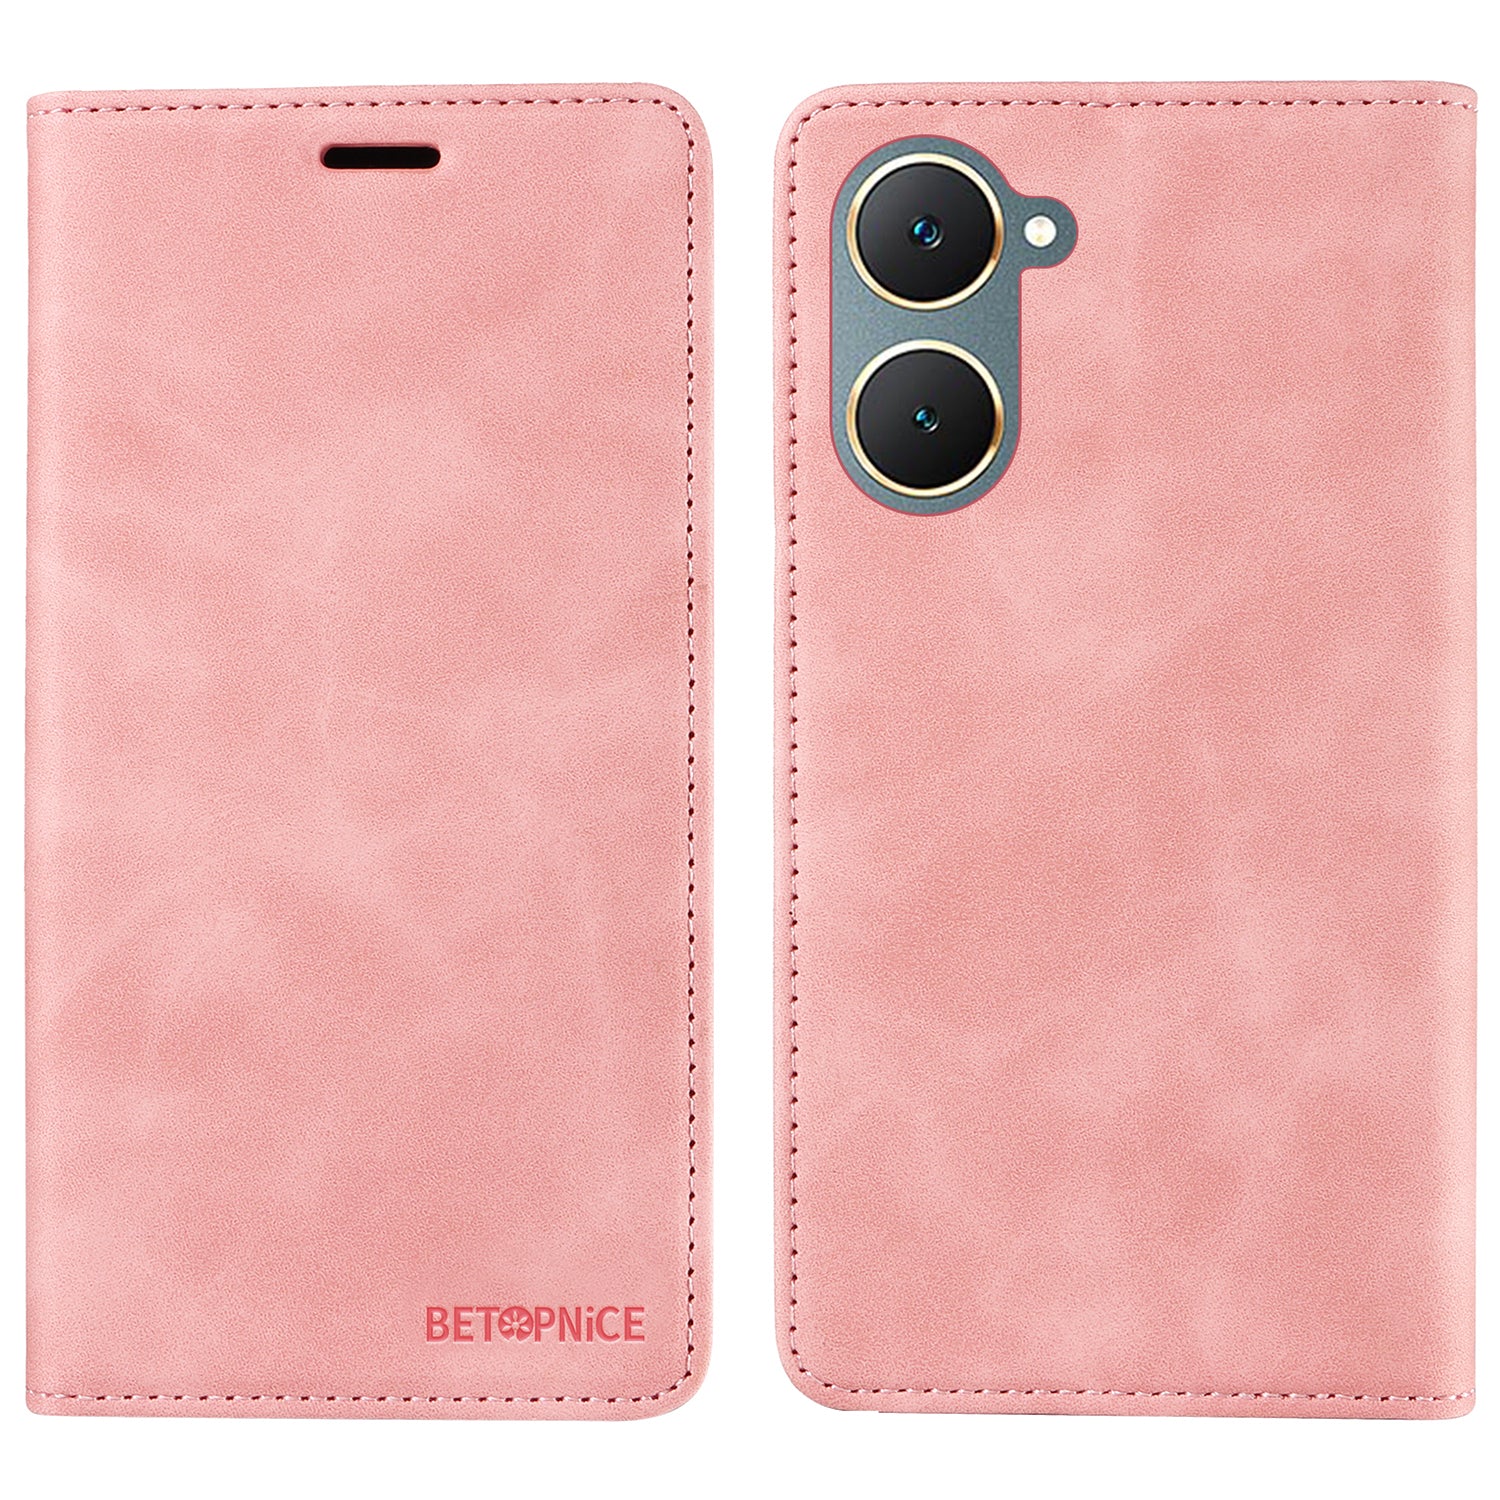 BETOPNICE 003 For vivo Y03 Case RFID Blocking Wallet Leather Flip Phone Cover - Pink